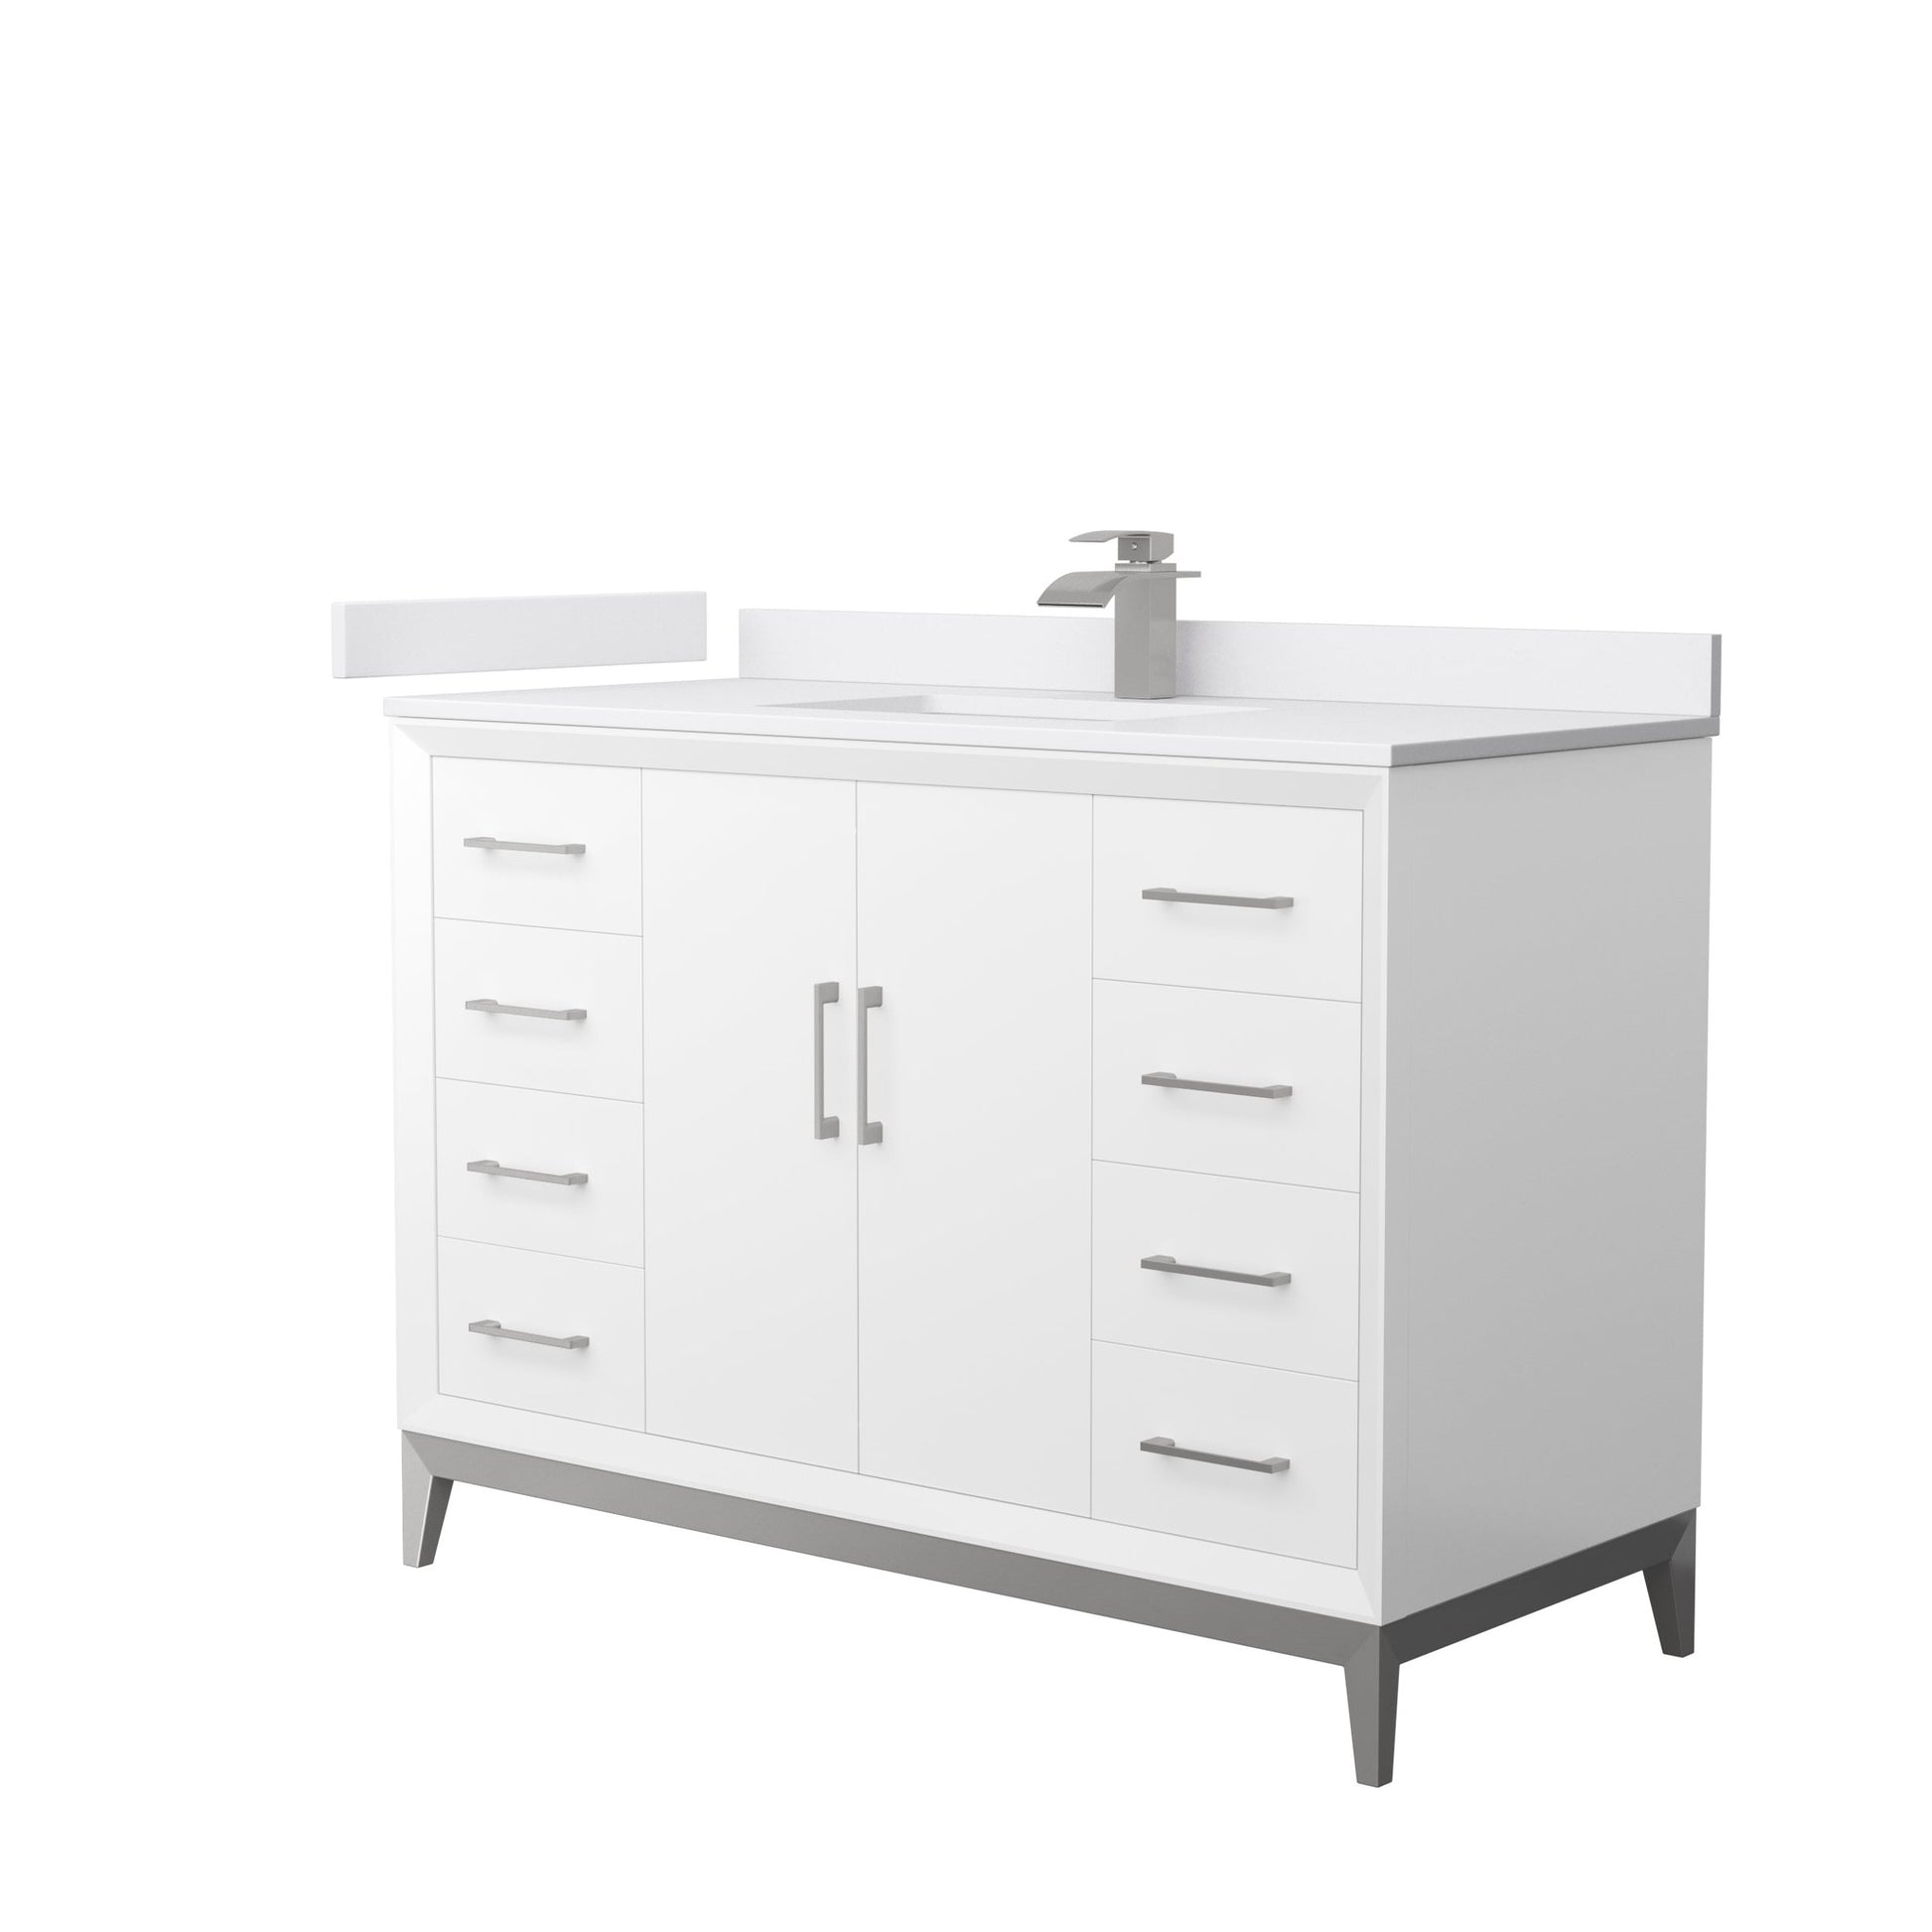 Wyndham Collection Amici 48" Single Bathroom Vanity in White, White Cultured Marble Countertop, Undermount Square Sink, Brushed Nickel Trim